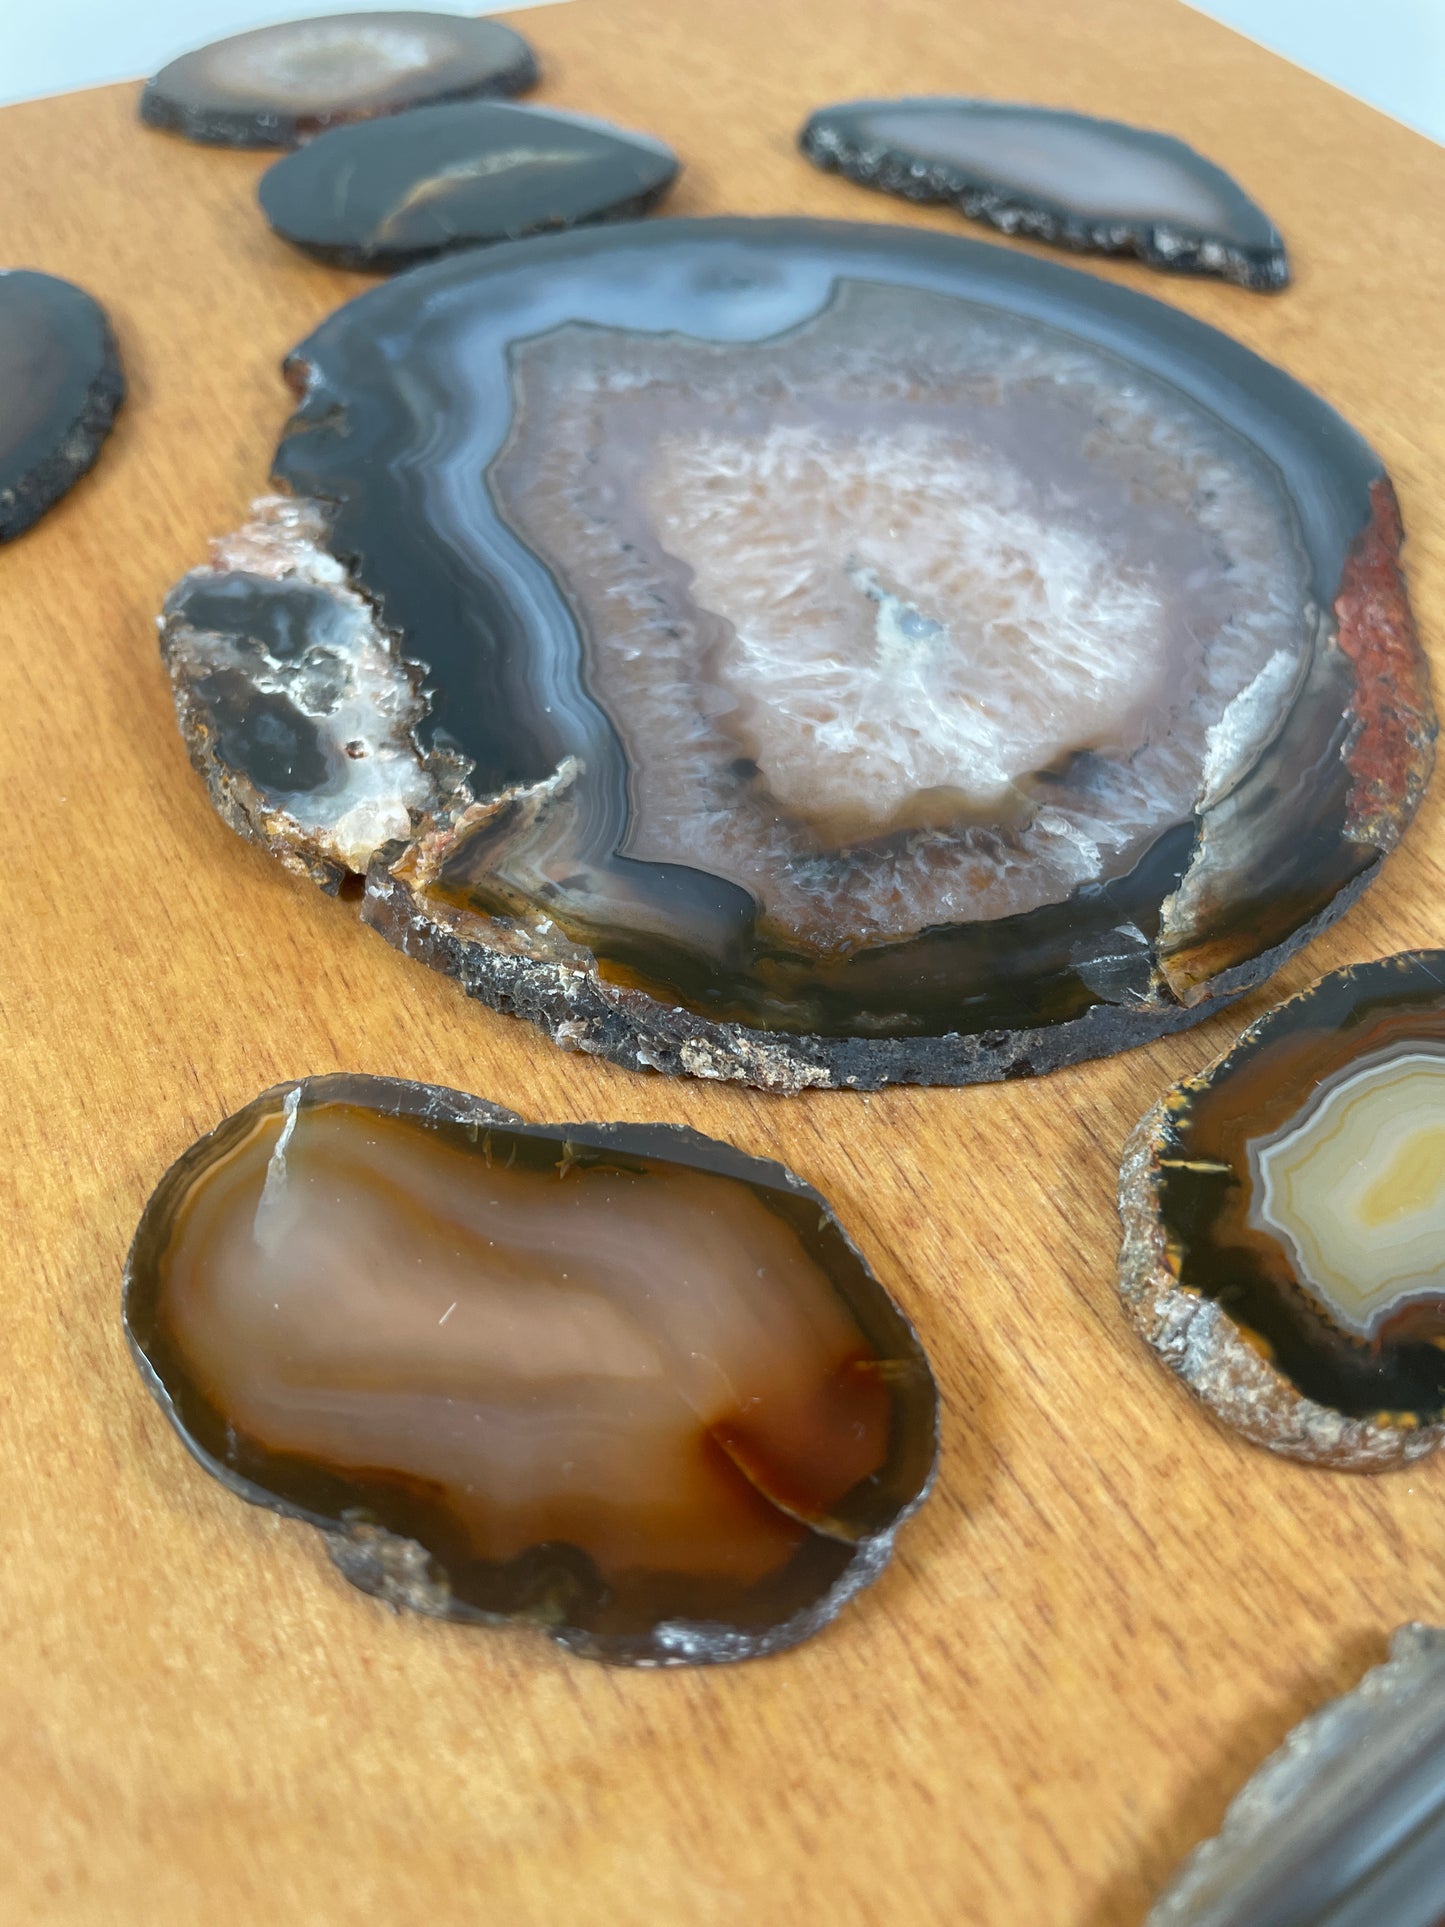 Agate Slices on the Wooden Canvas Board